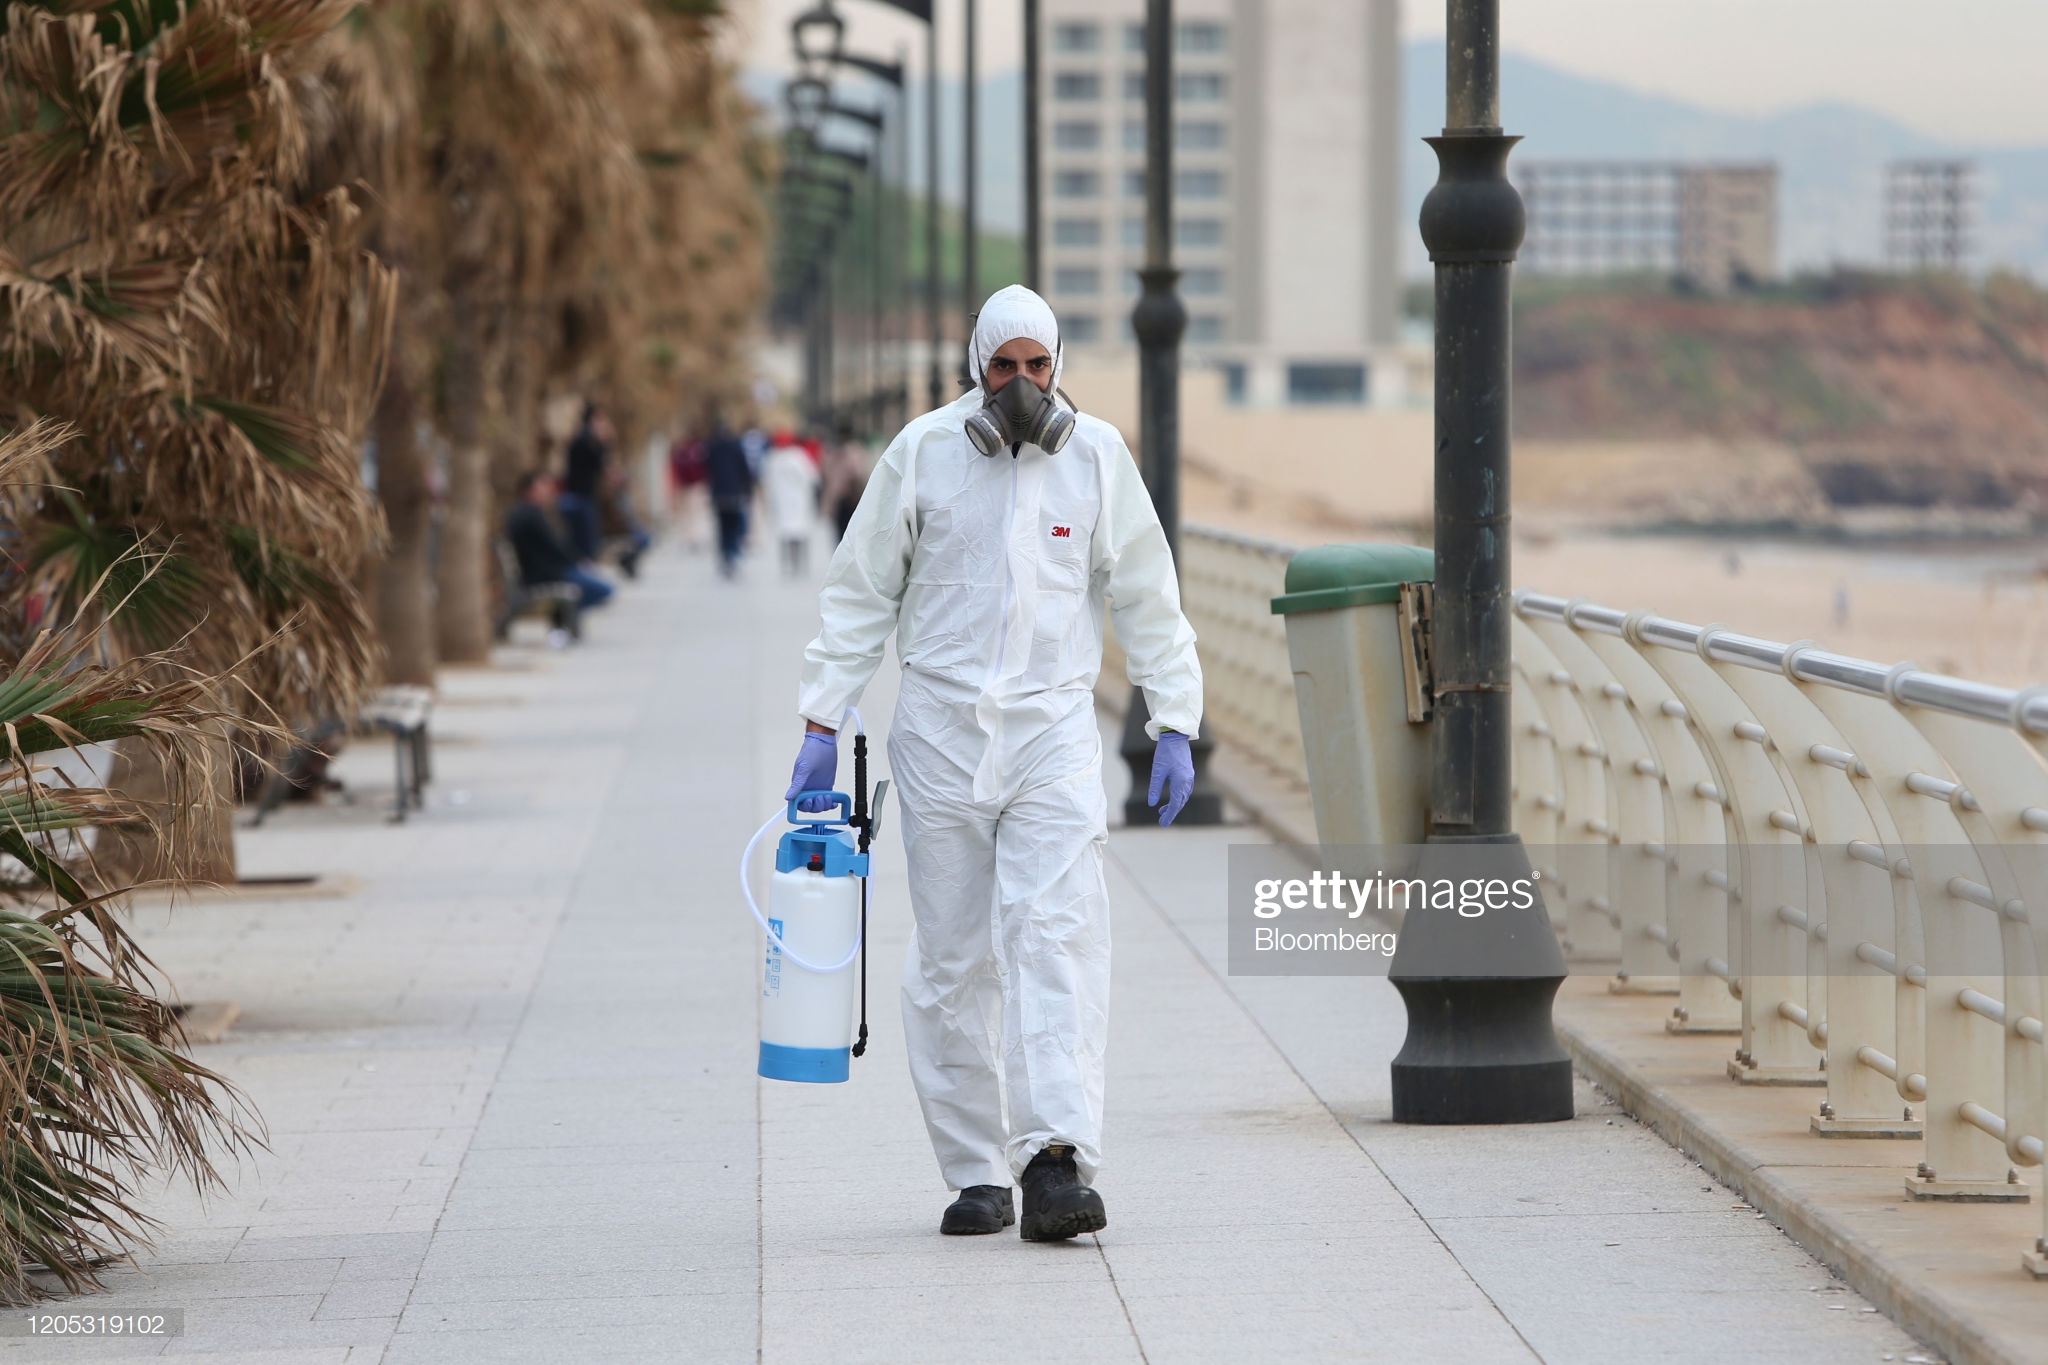 cleaning-company-worker-carries-disinfectant-to-protect-against-the-picture-id1205319102